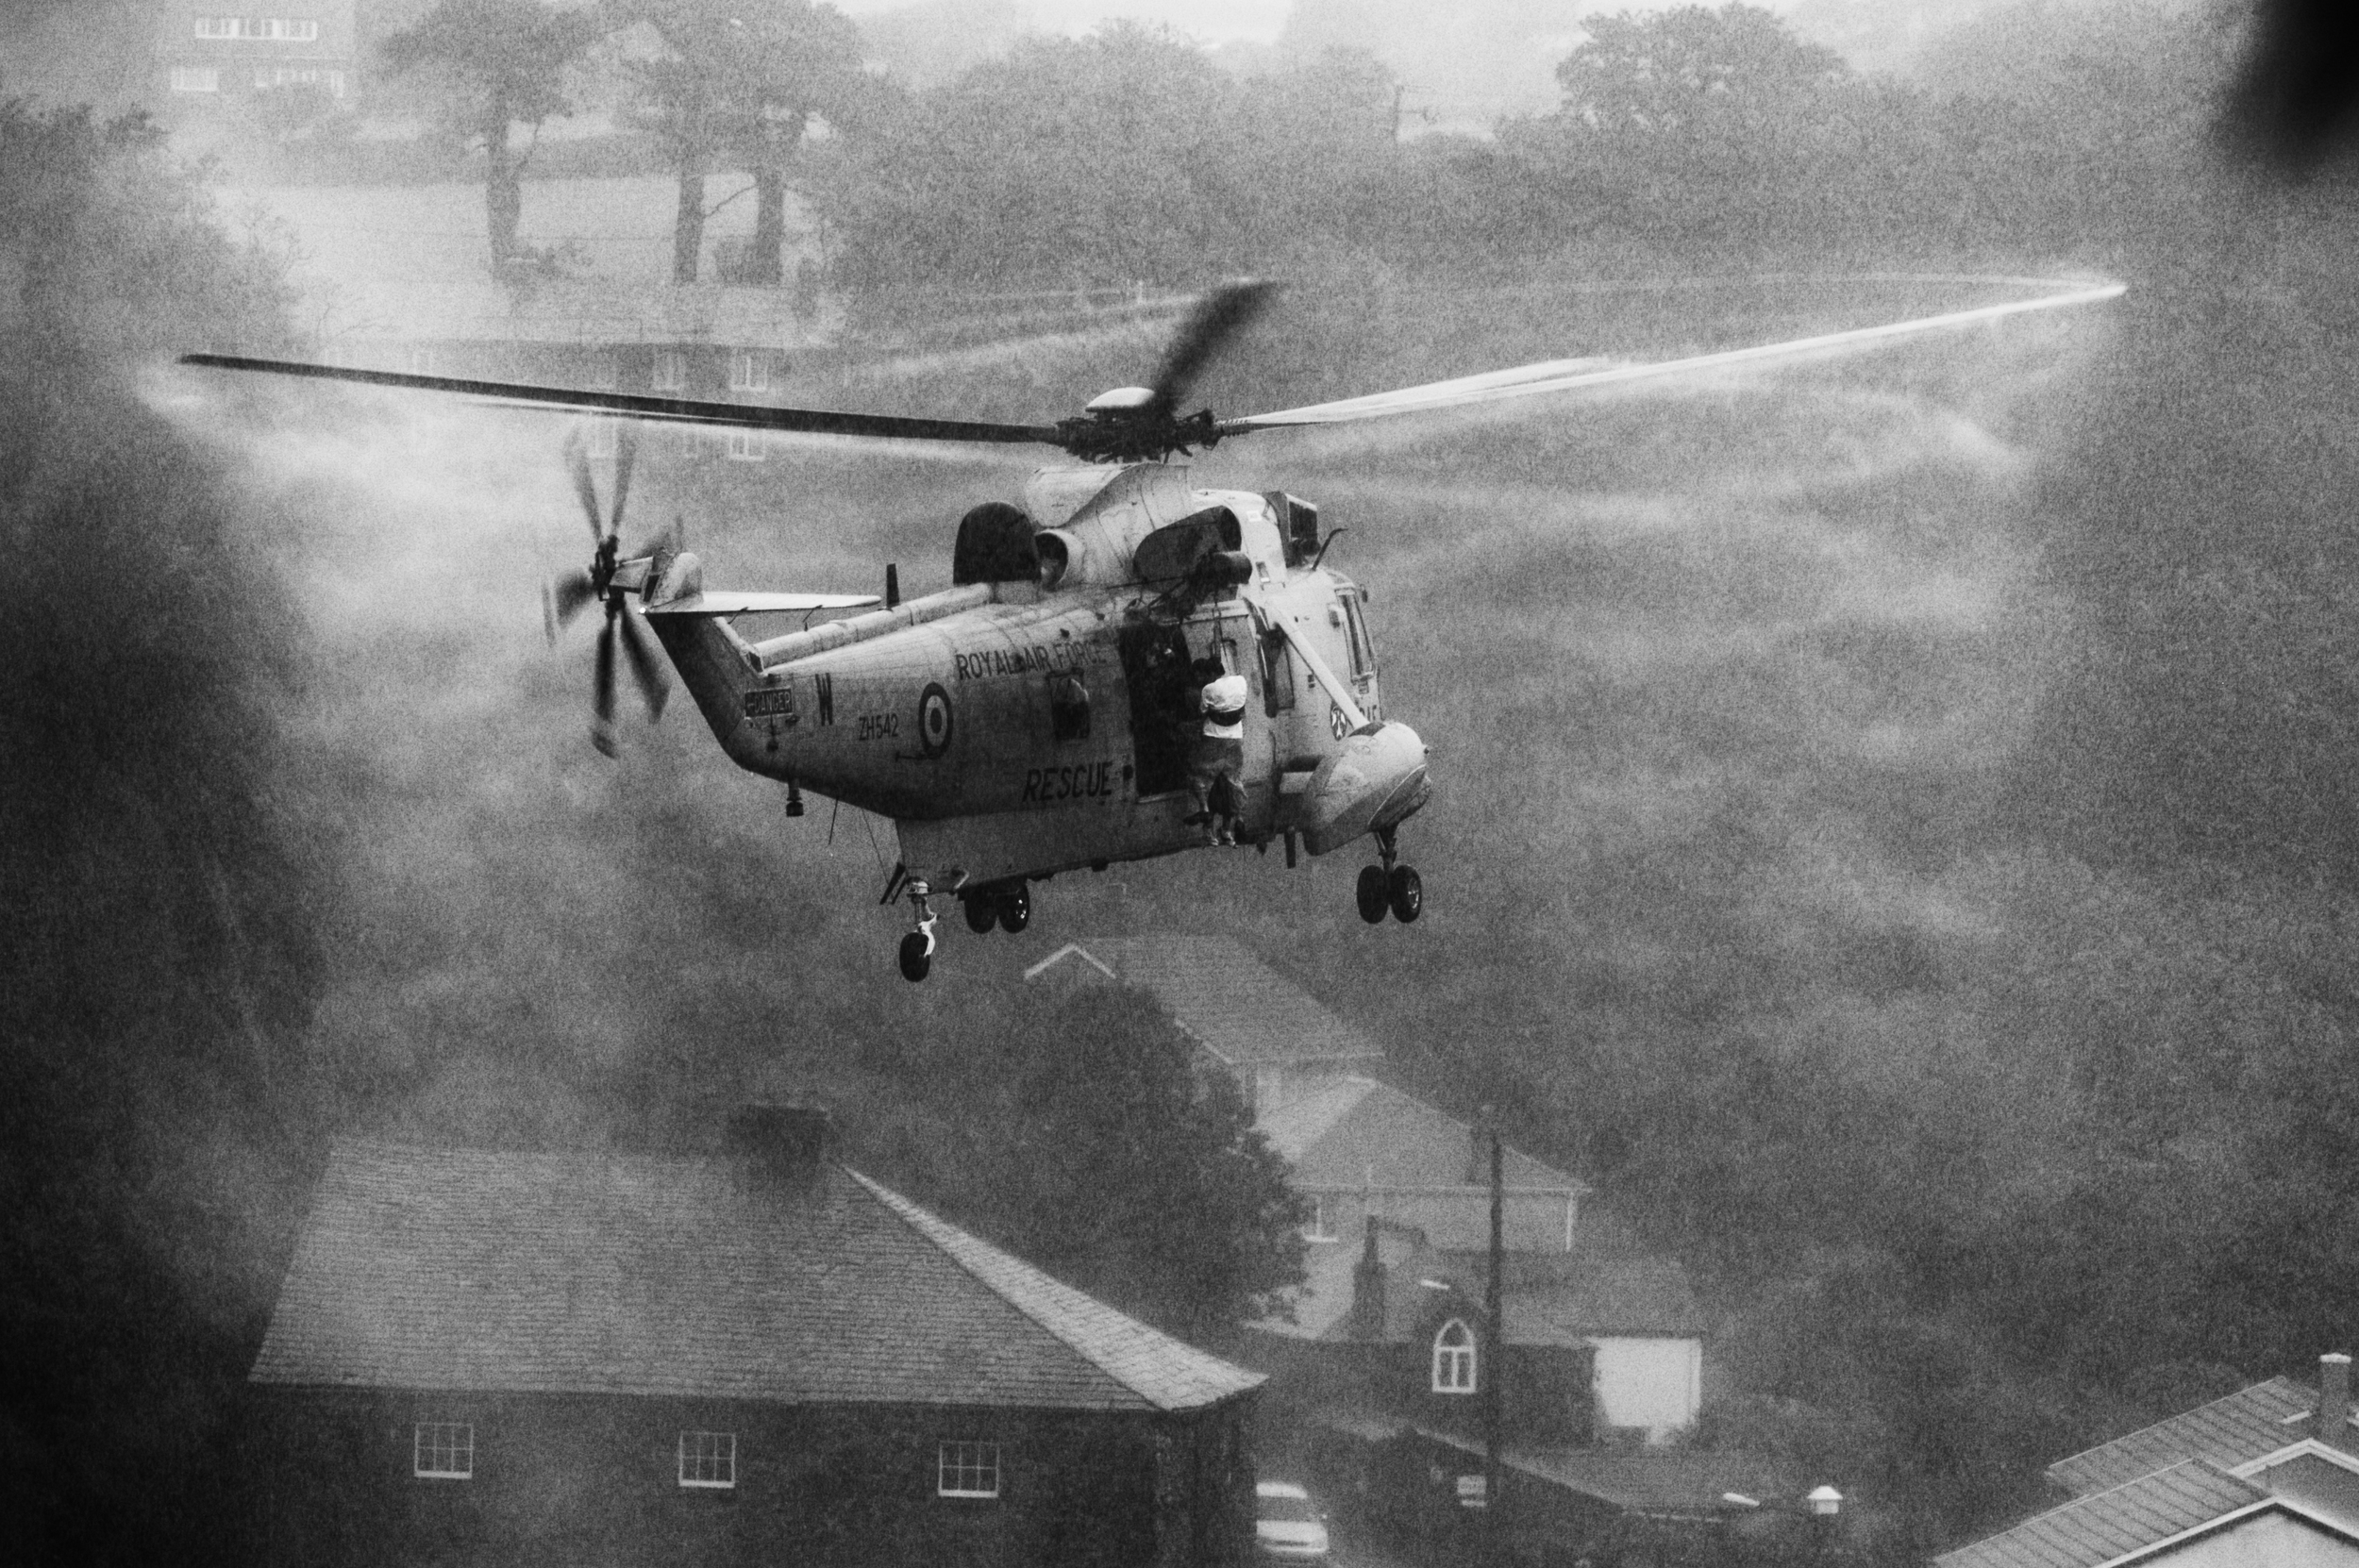   RAF Search and Rescue helicopters rescue flood victims in Boscastle, Cornwall, August 16, 2004. (Photo/Mark Pearson)  